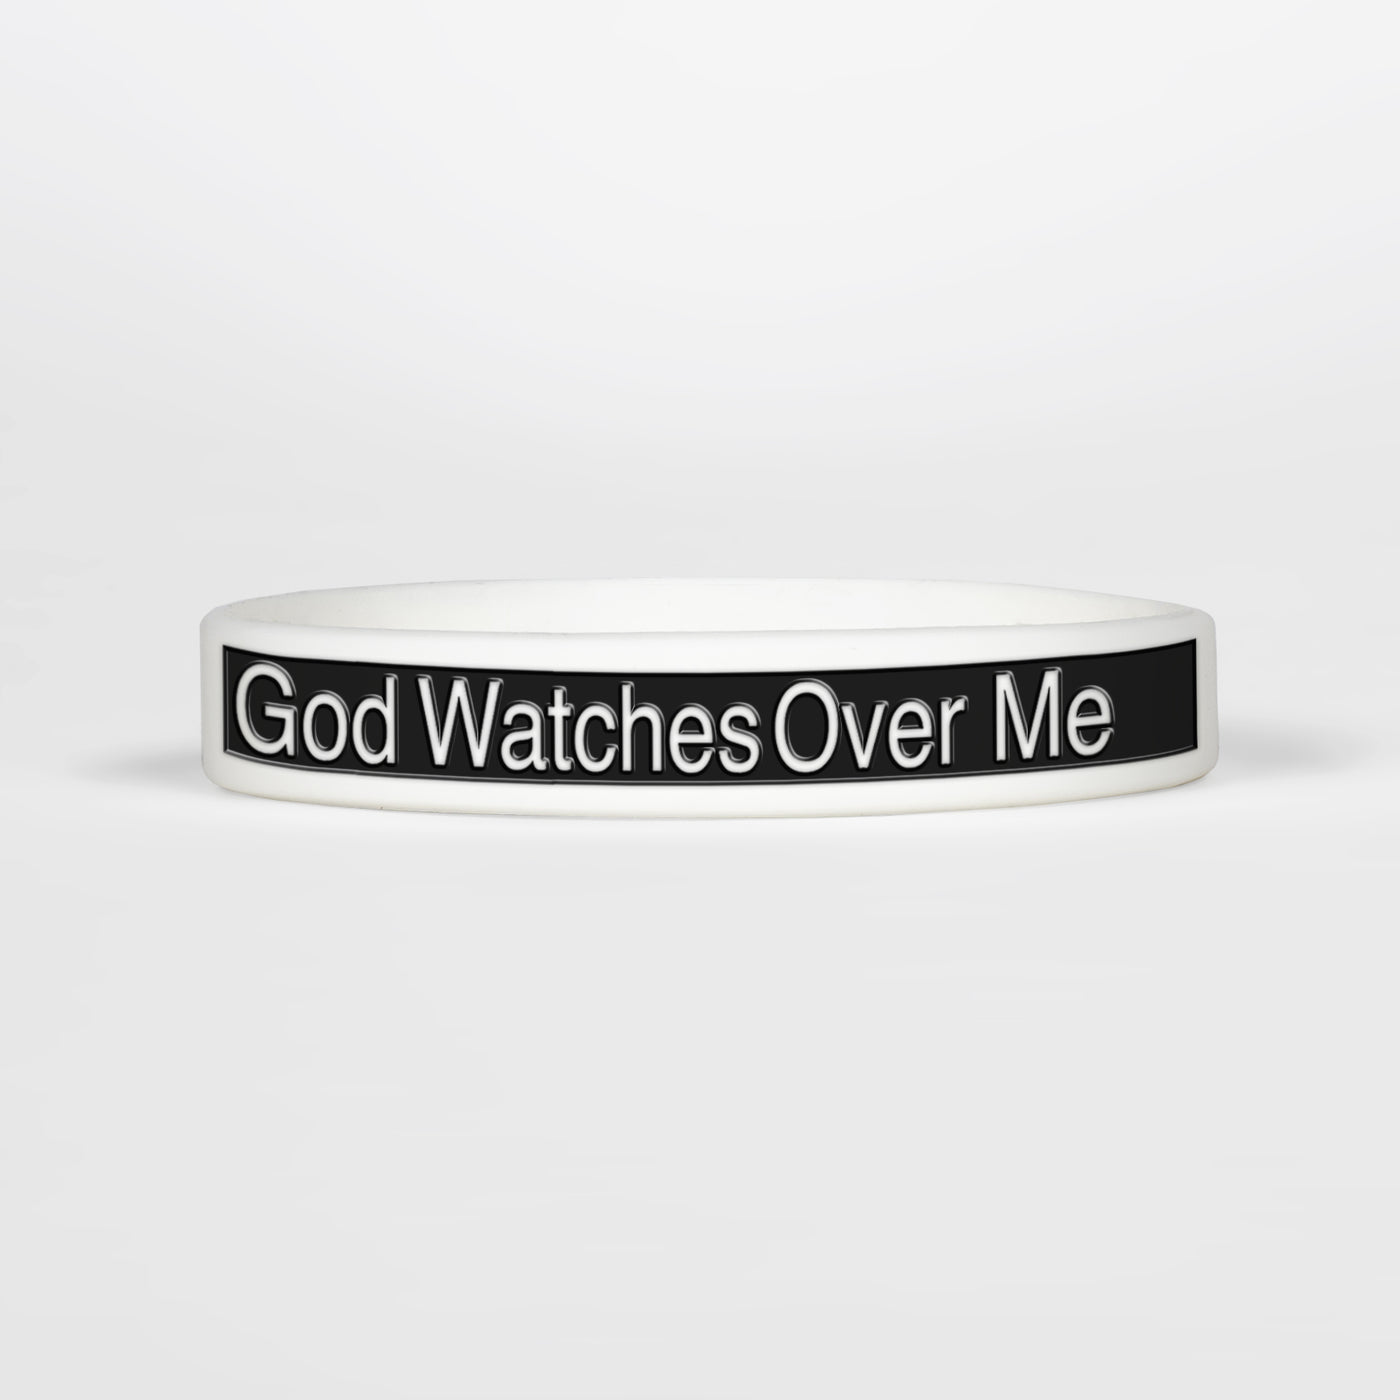 God Watches Over Me Motivational Wristband